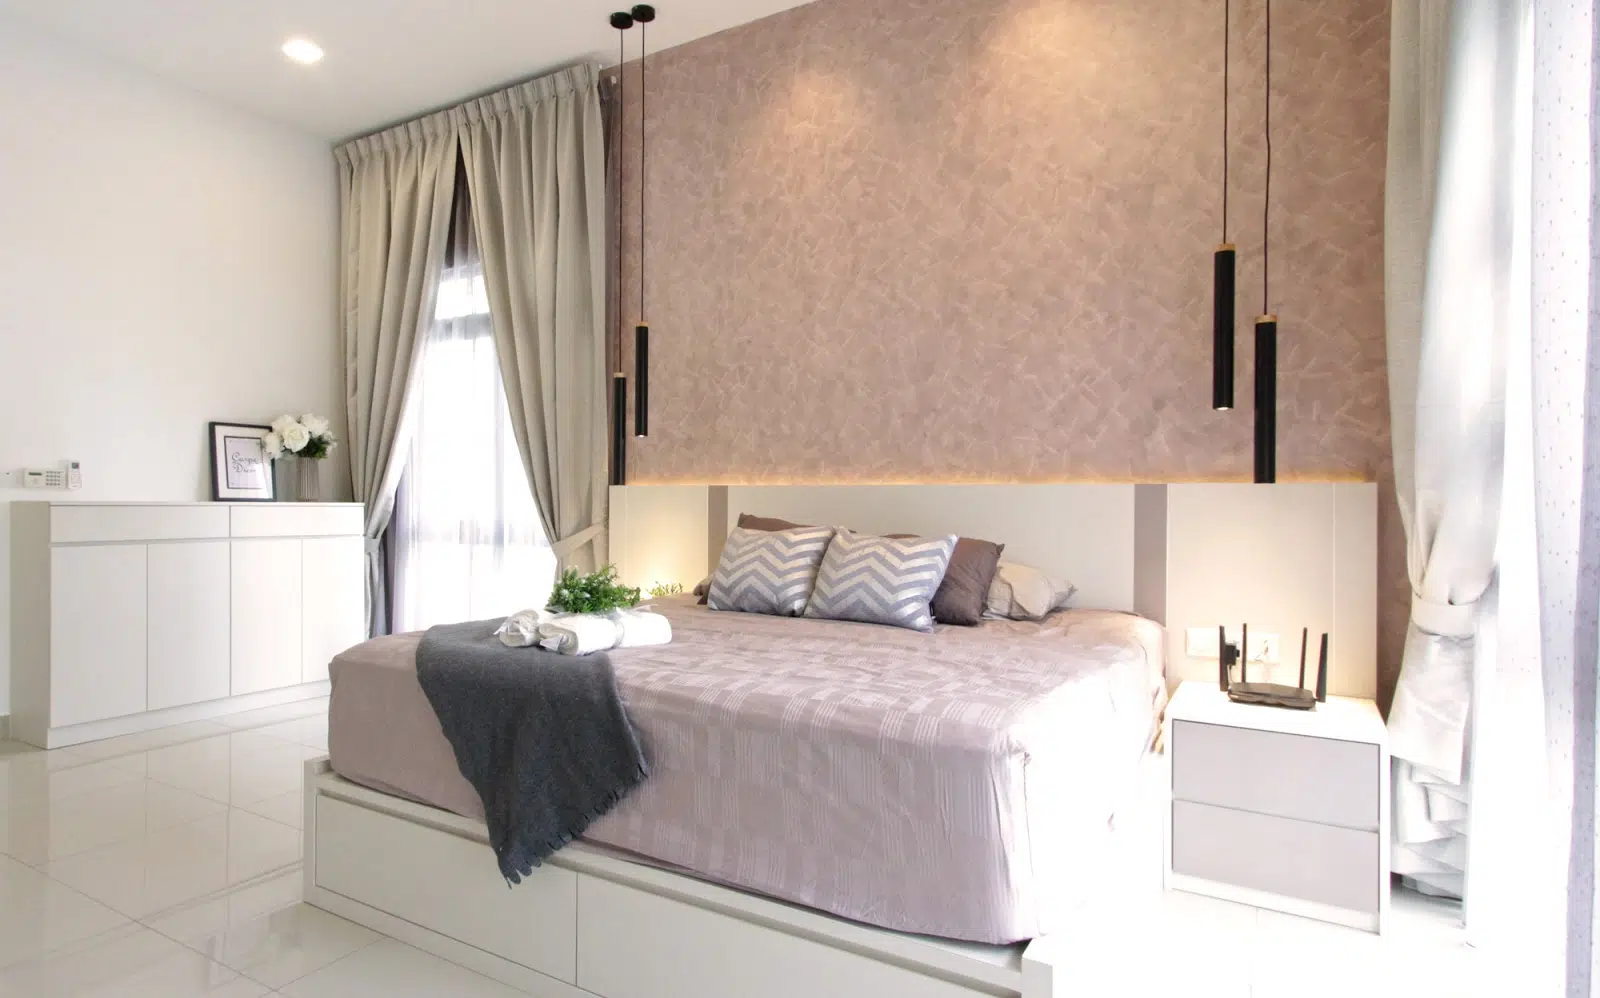 Above: Each of the bedrooms was coated with a different colour to inject some personalisation.